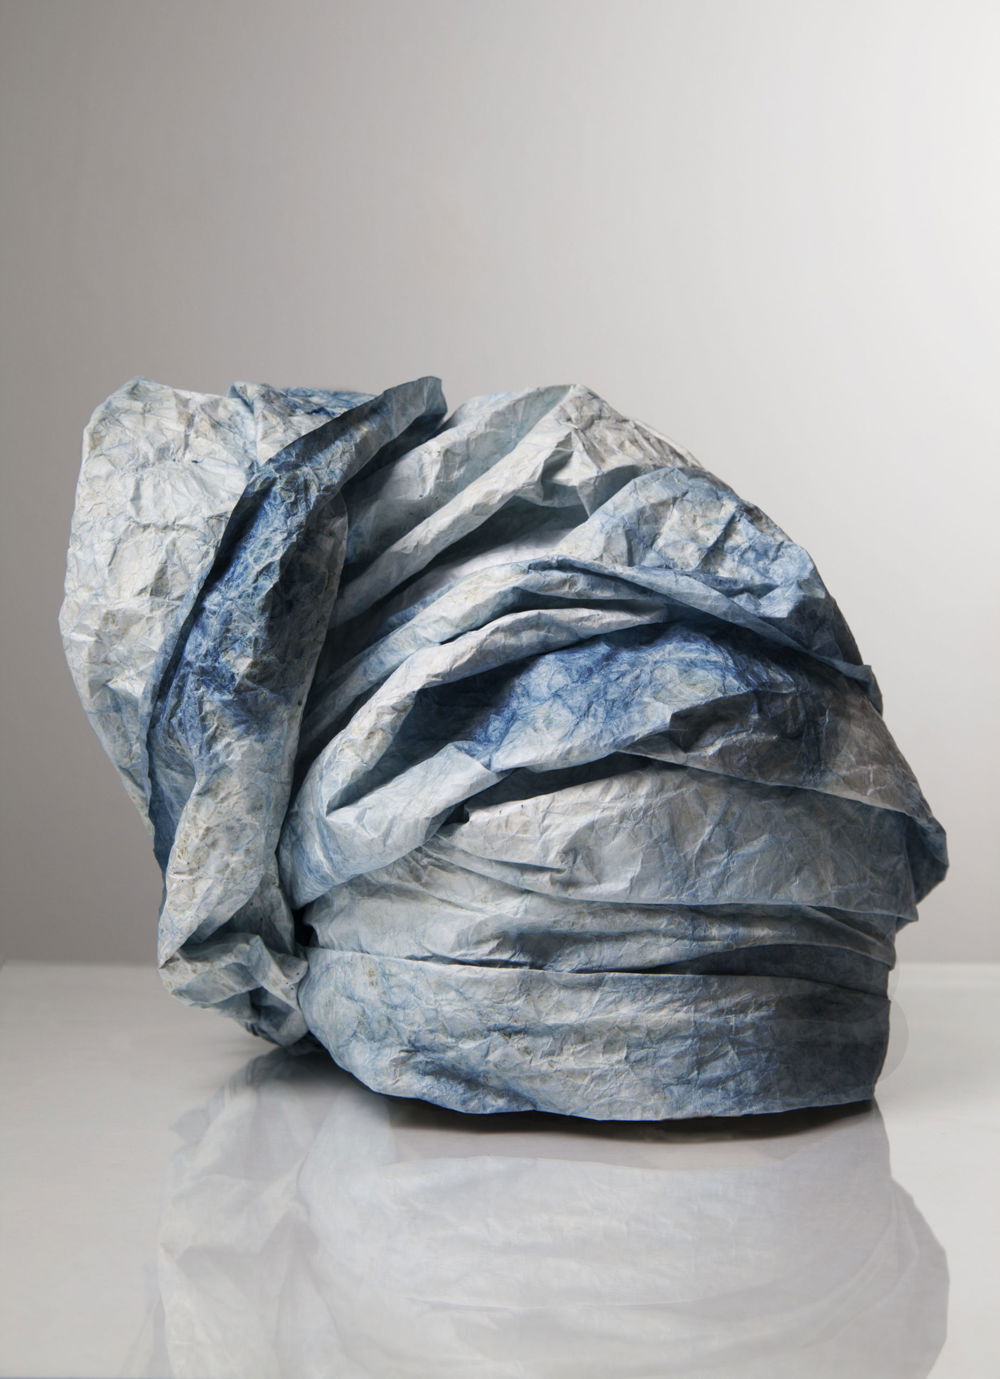 Photo of a piece of blue-dyed fabric, wound and folded around itself to form a sinuous, crownlike shape reminiscent of a Nigerian gele or head tie worn by Yoruba women. The dye is uneven and darker in some spots than others, showing a gently wrinkled texture.